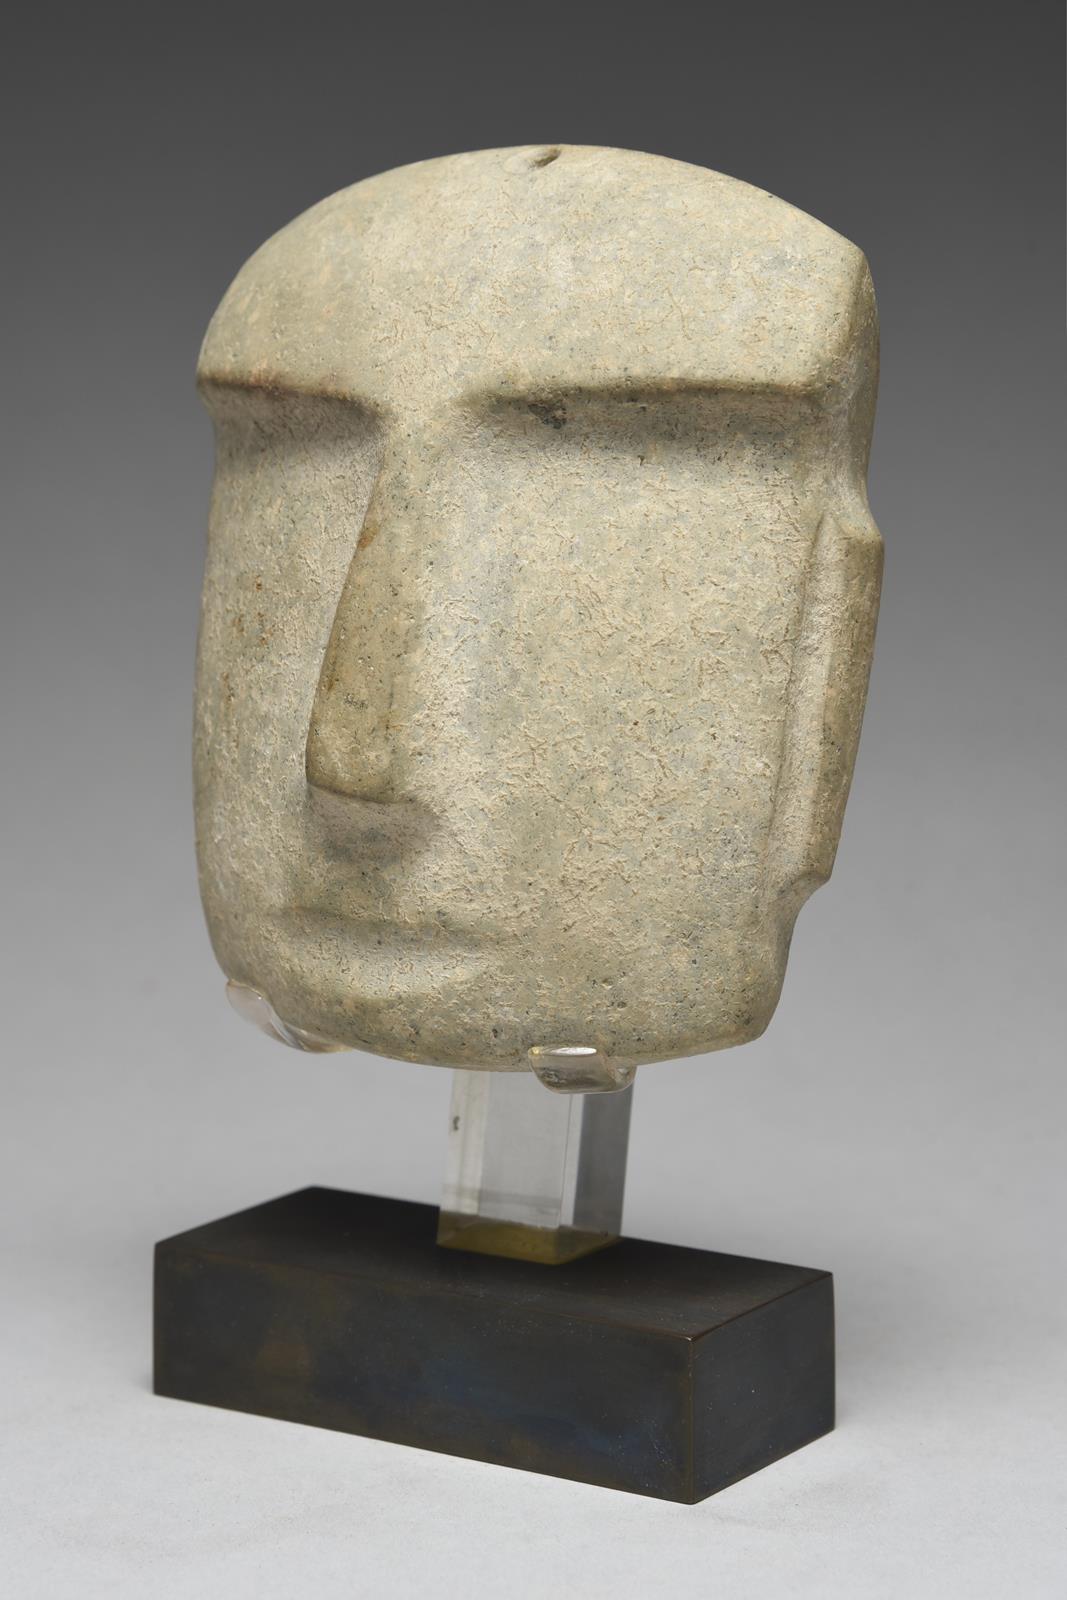 A Mezcala mask Mexico, circa 400 BC - 100 AD grey/green stone, with an overhanging brow and and - Image 2 of 6